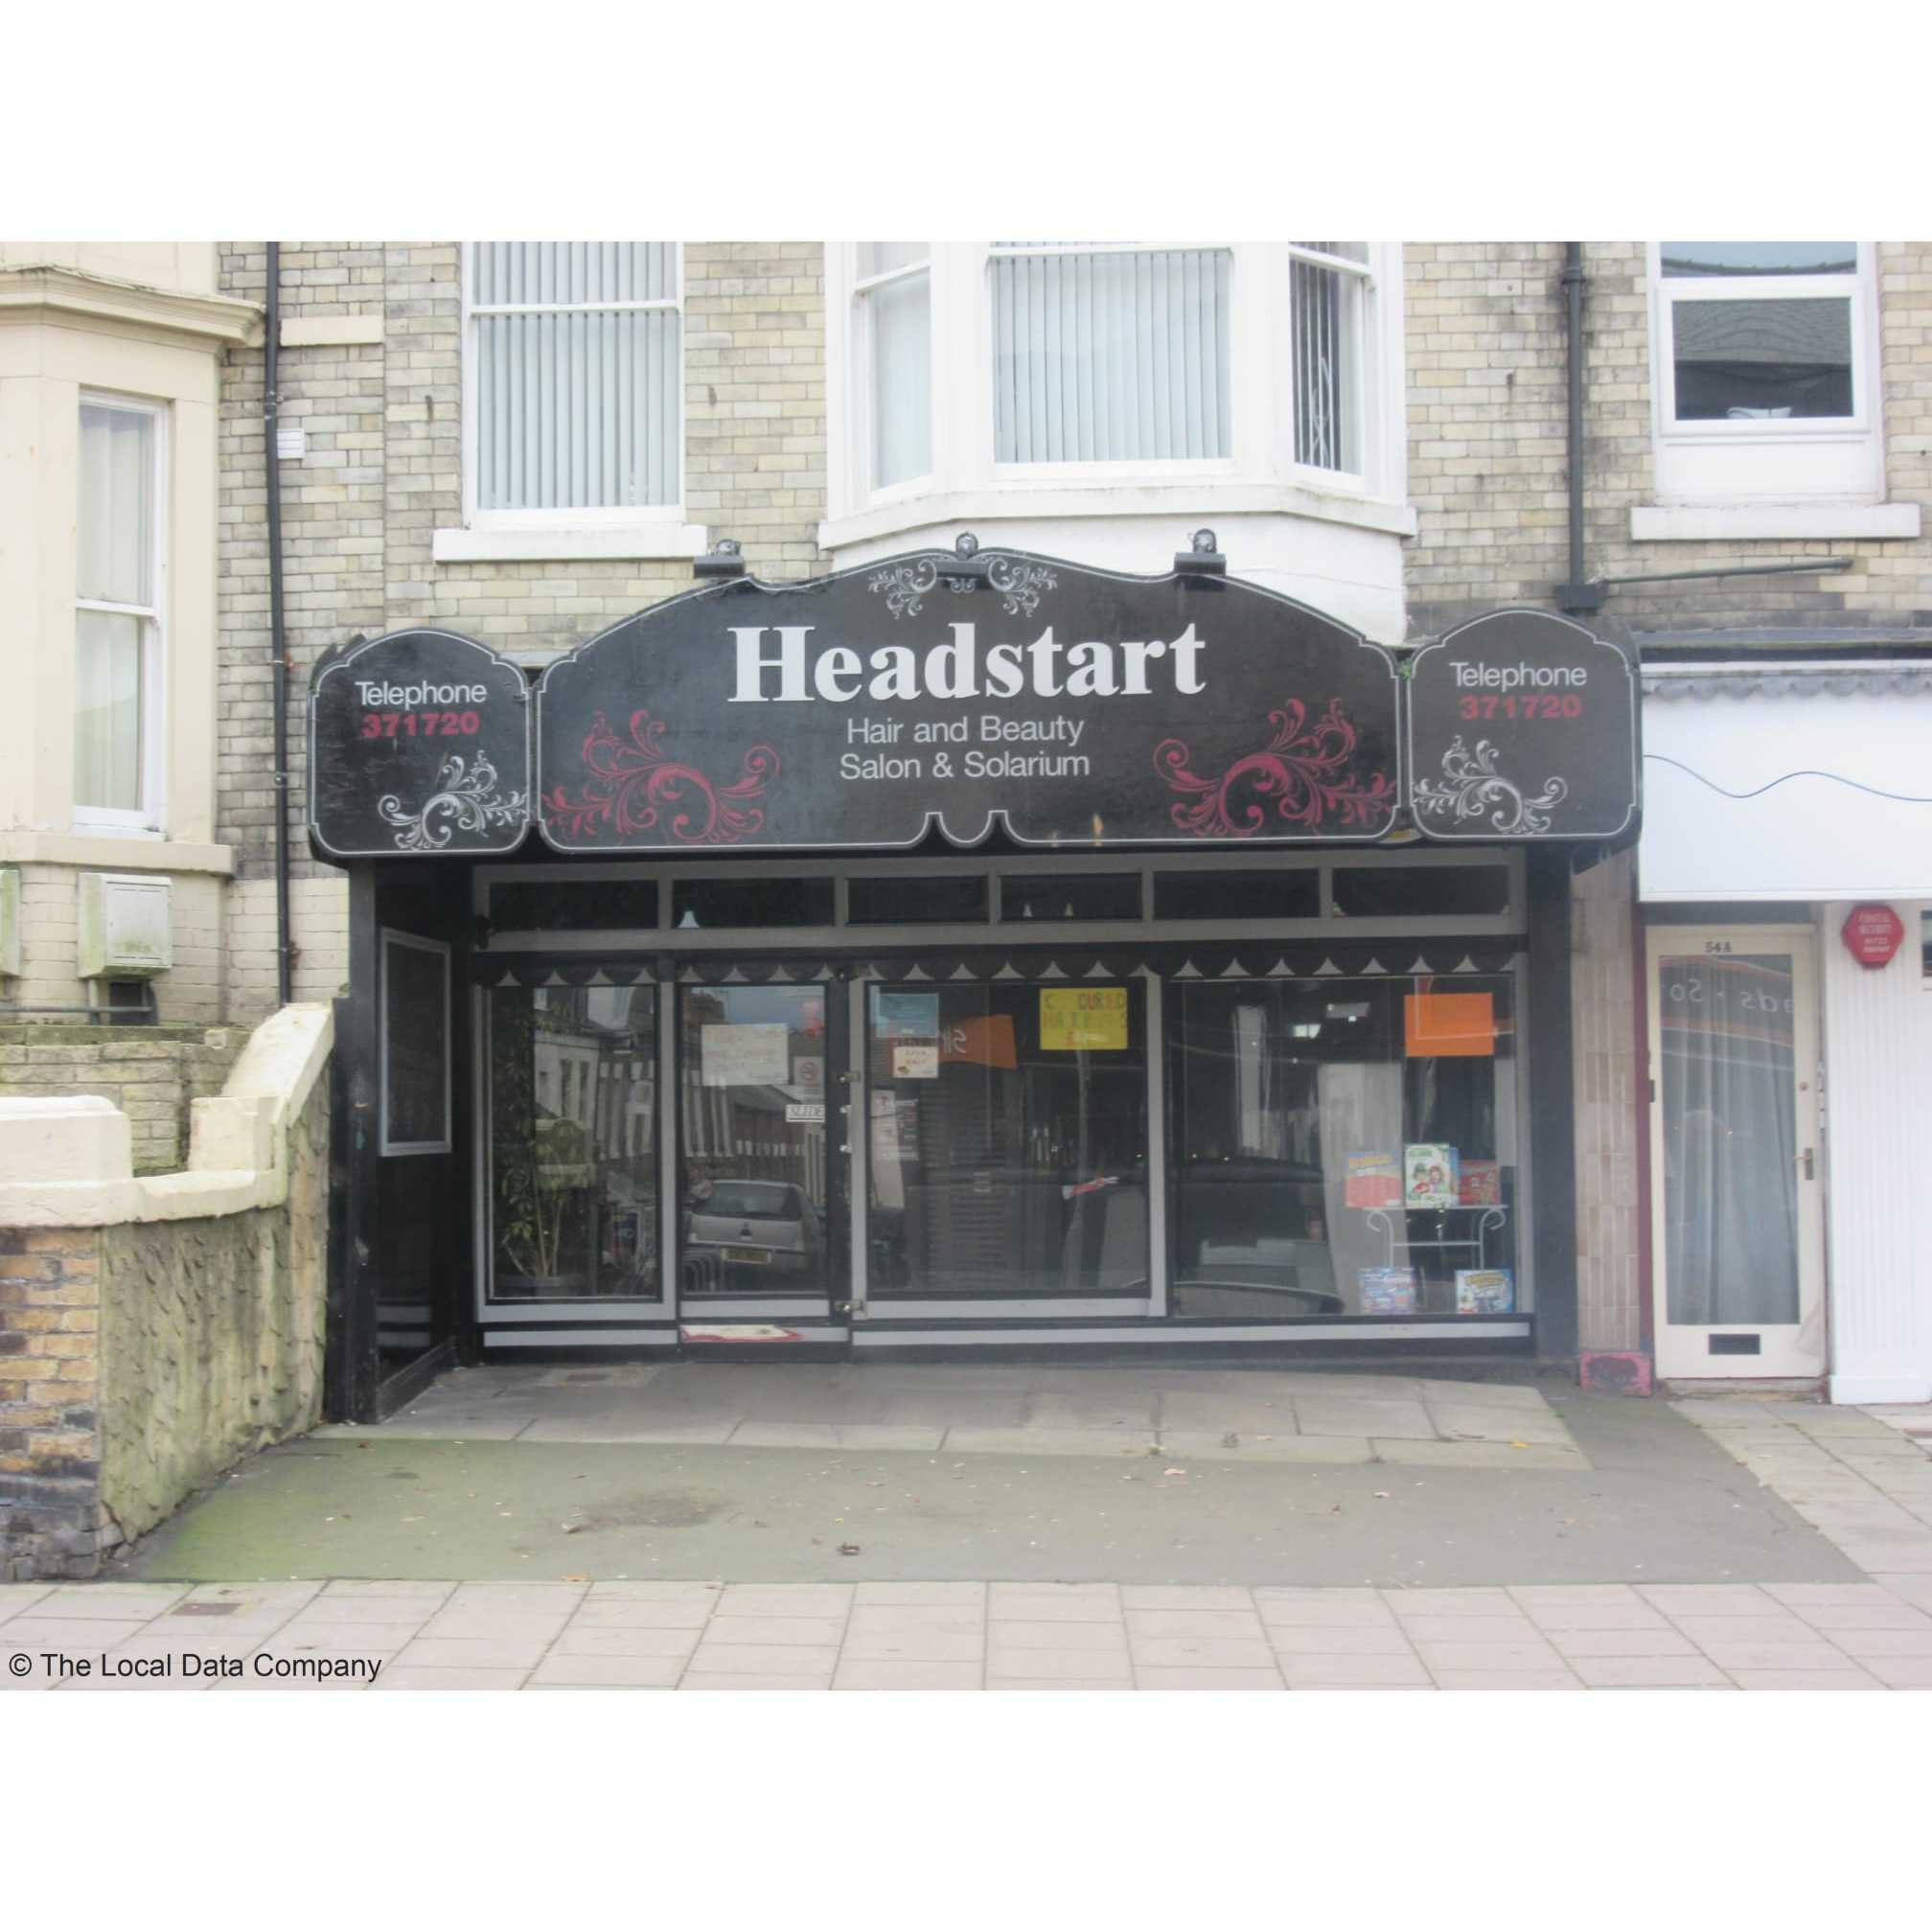 LOGO Headstart Hair, Beauty and Nails Scarborough 01723 371720